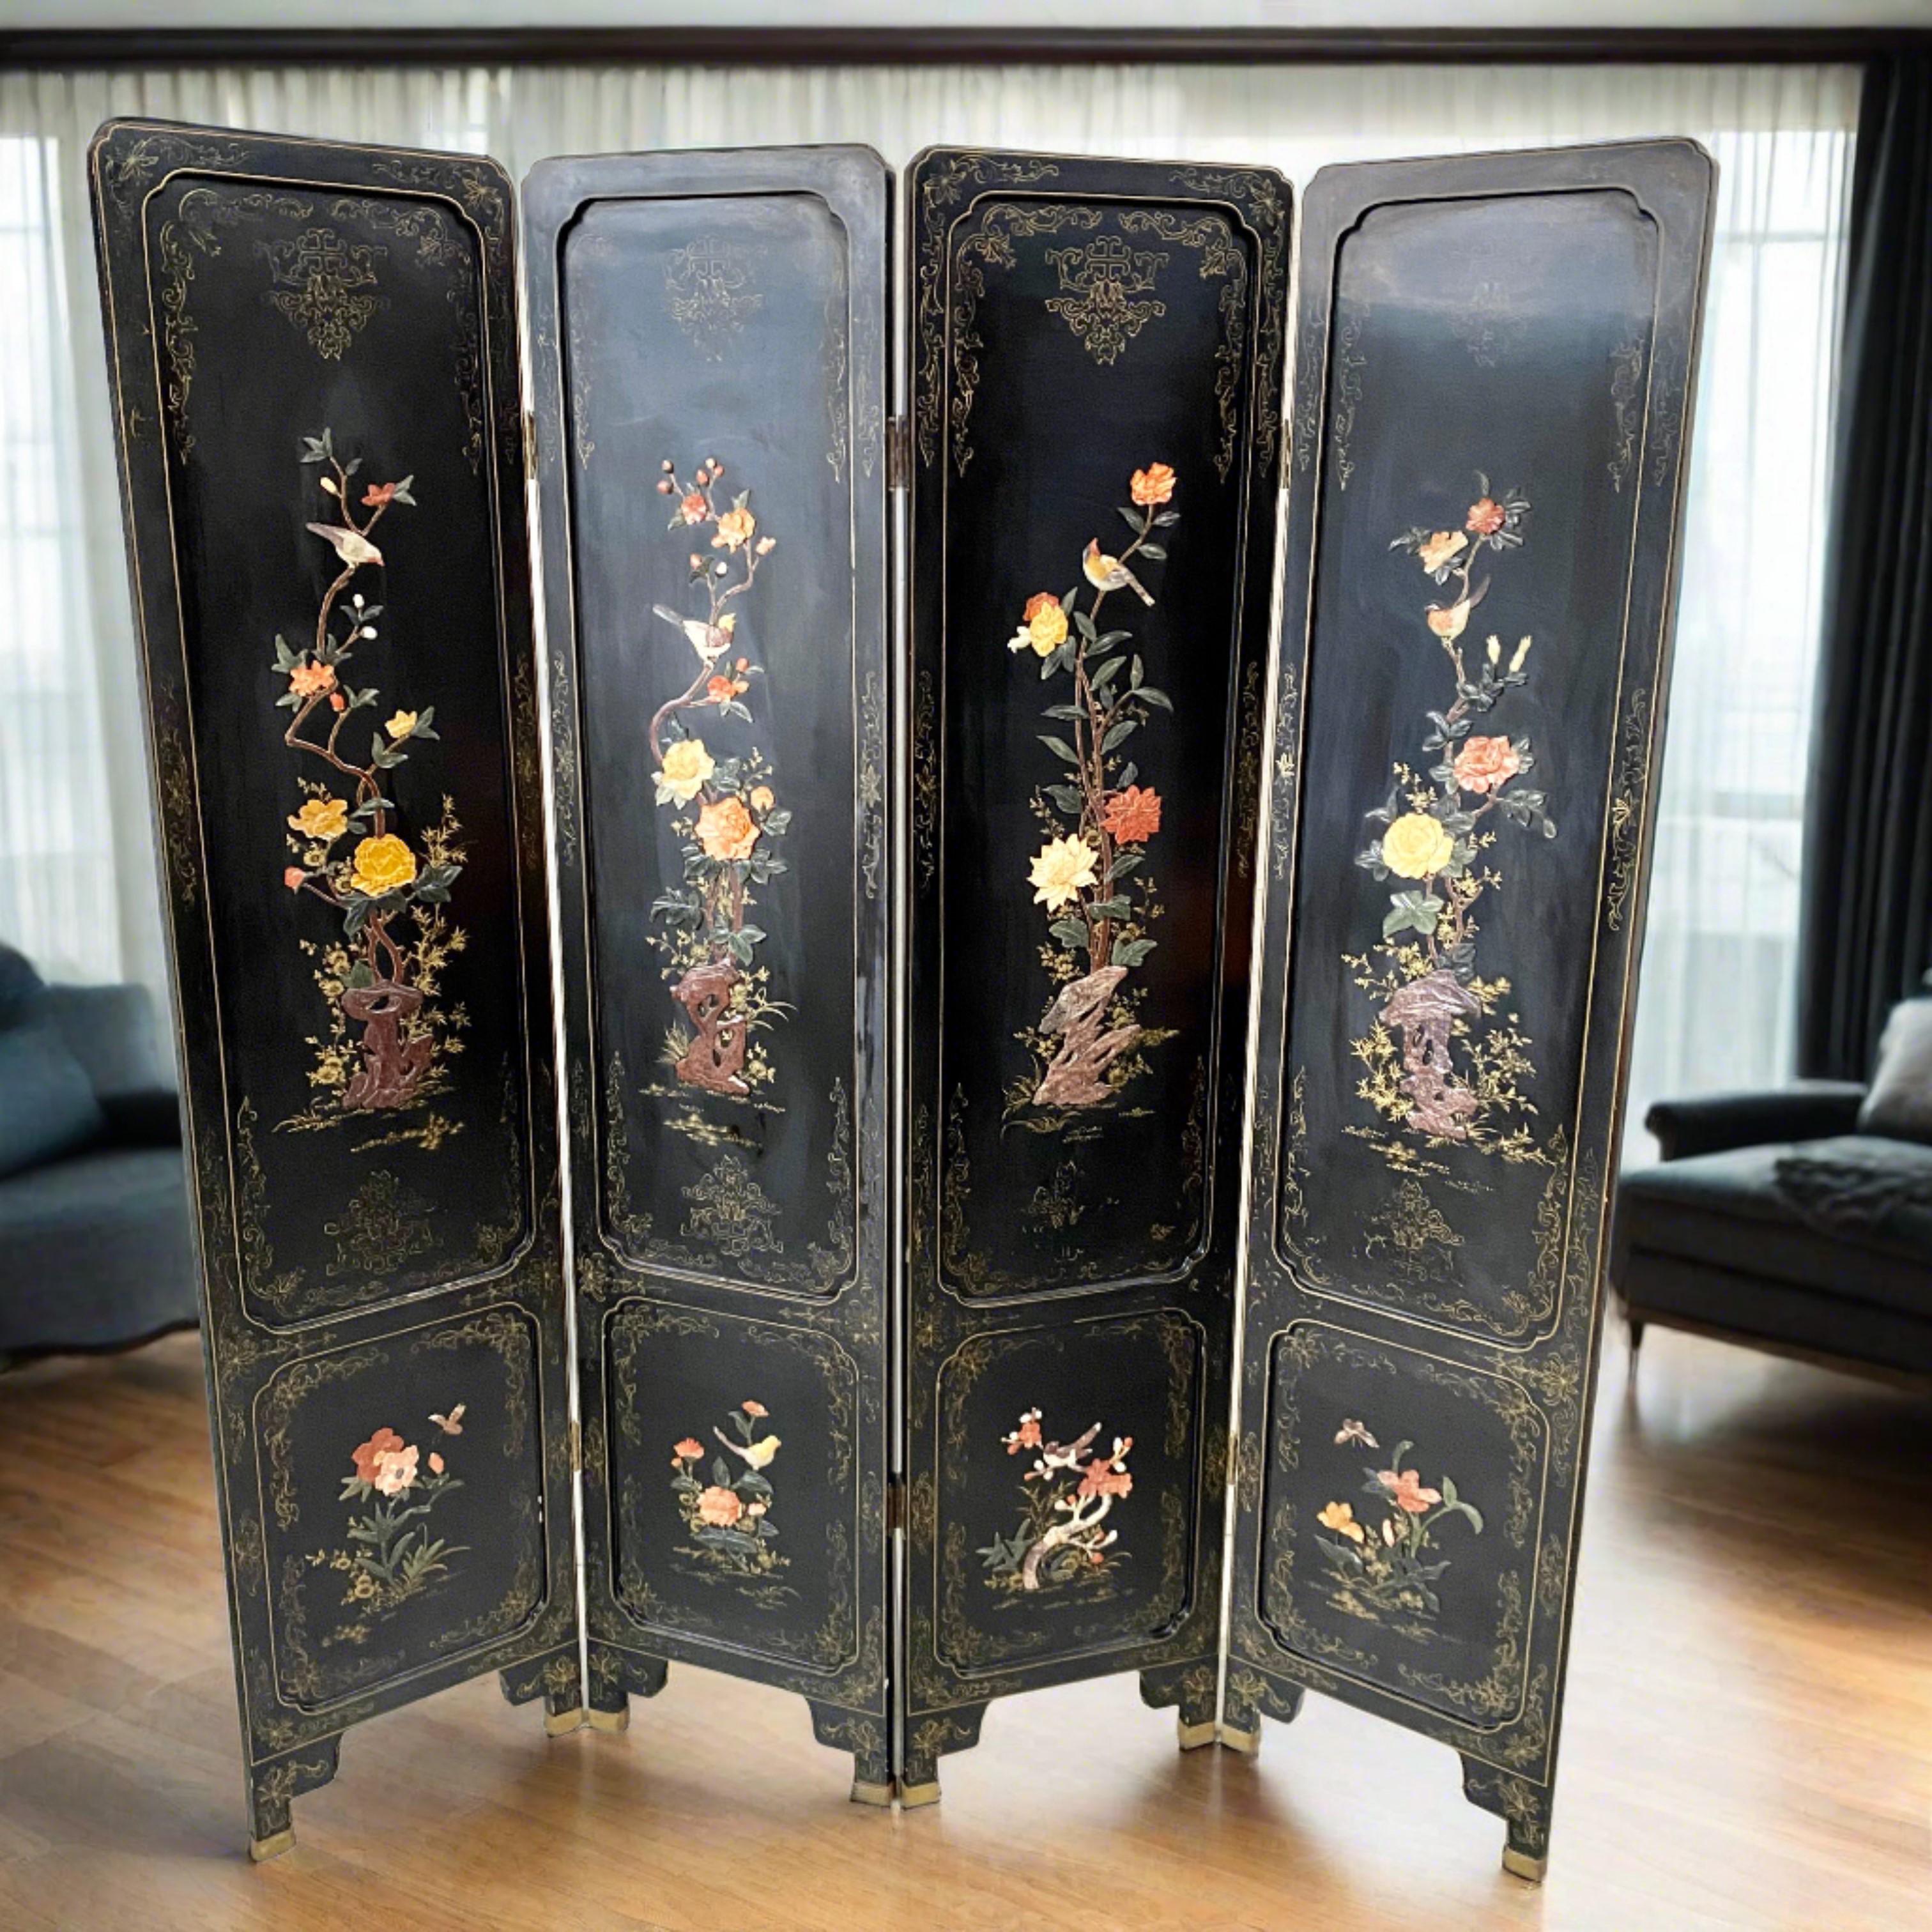 Mid-20th Century Chinese Black Carved Soapstone Flower Birds 4 Panel Folding Screen Room Divider For Sale